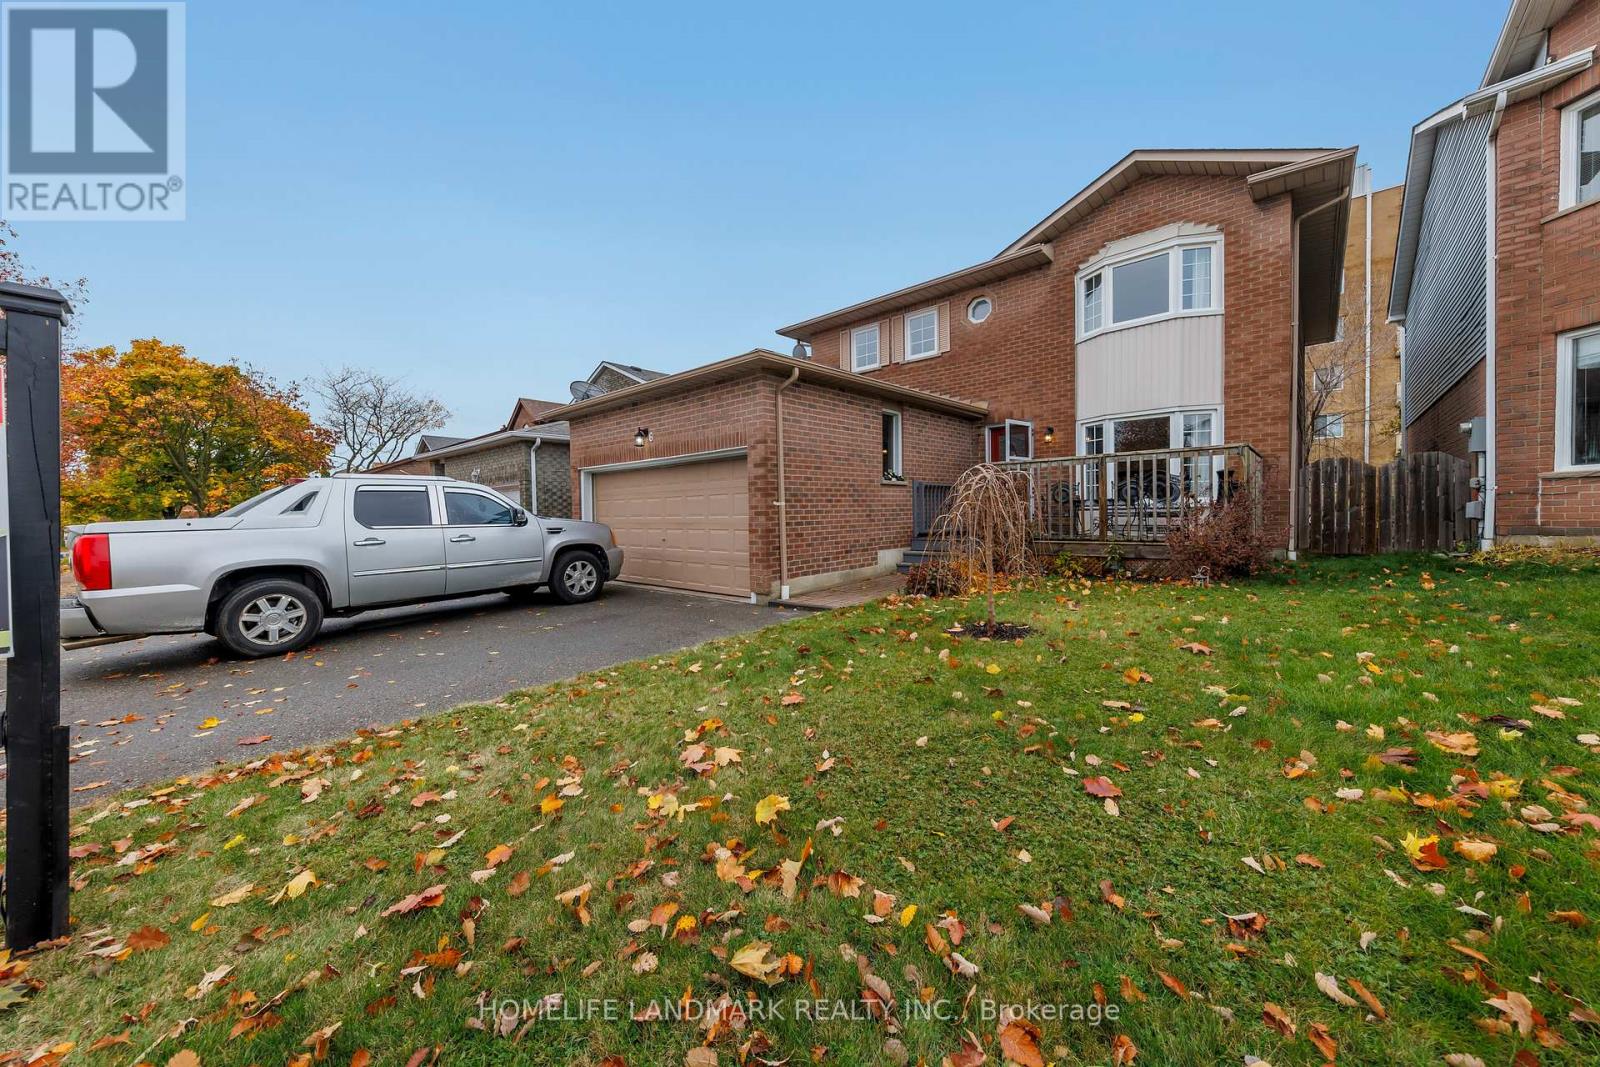 6 Wood Drive, Whitby, 6 Bedrooms Bedrooms, ,4 BathroomsBathrooms,Single Family,For Sale,Wood,E8220120